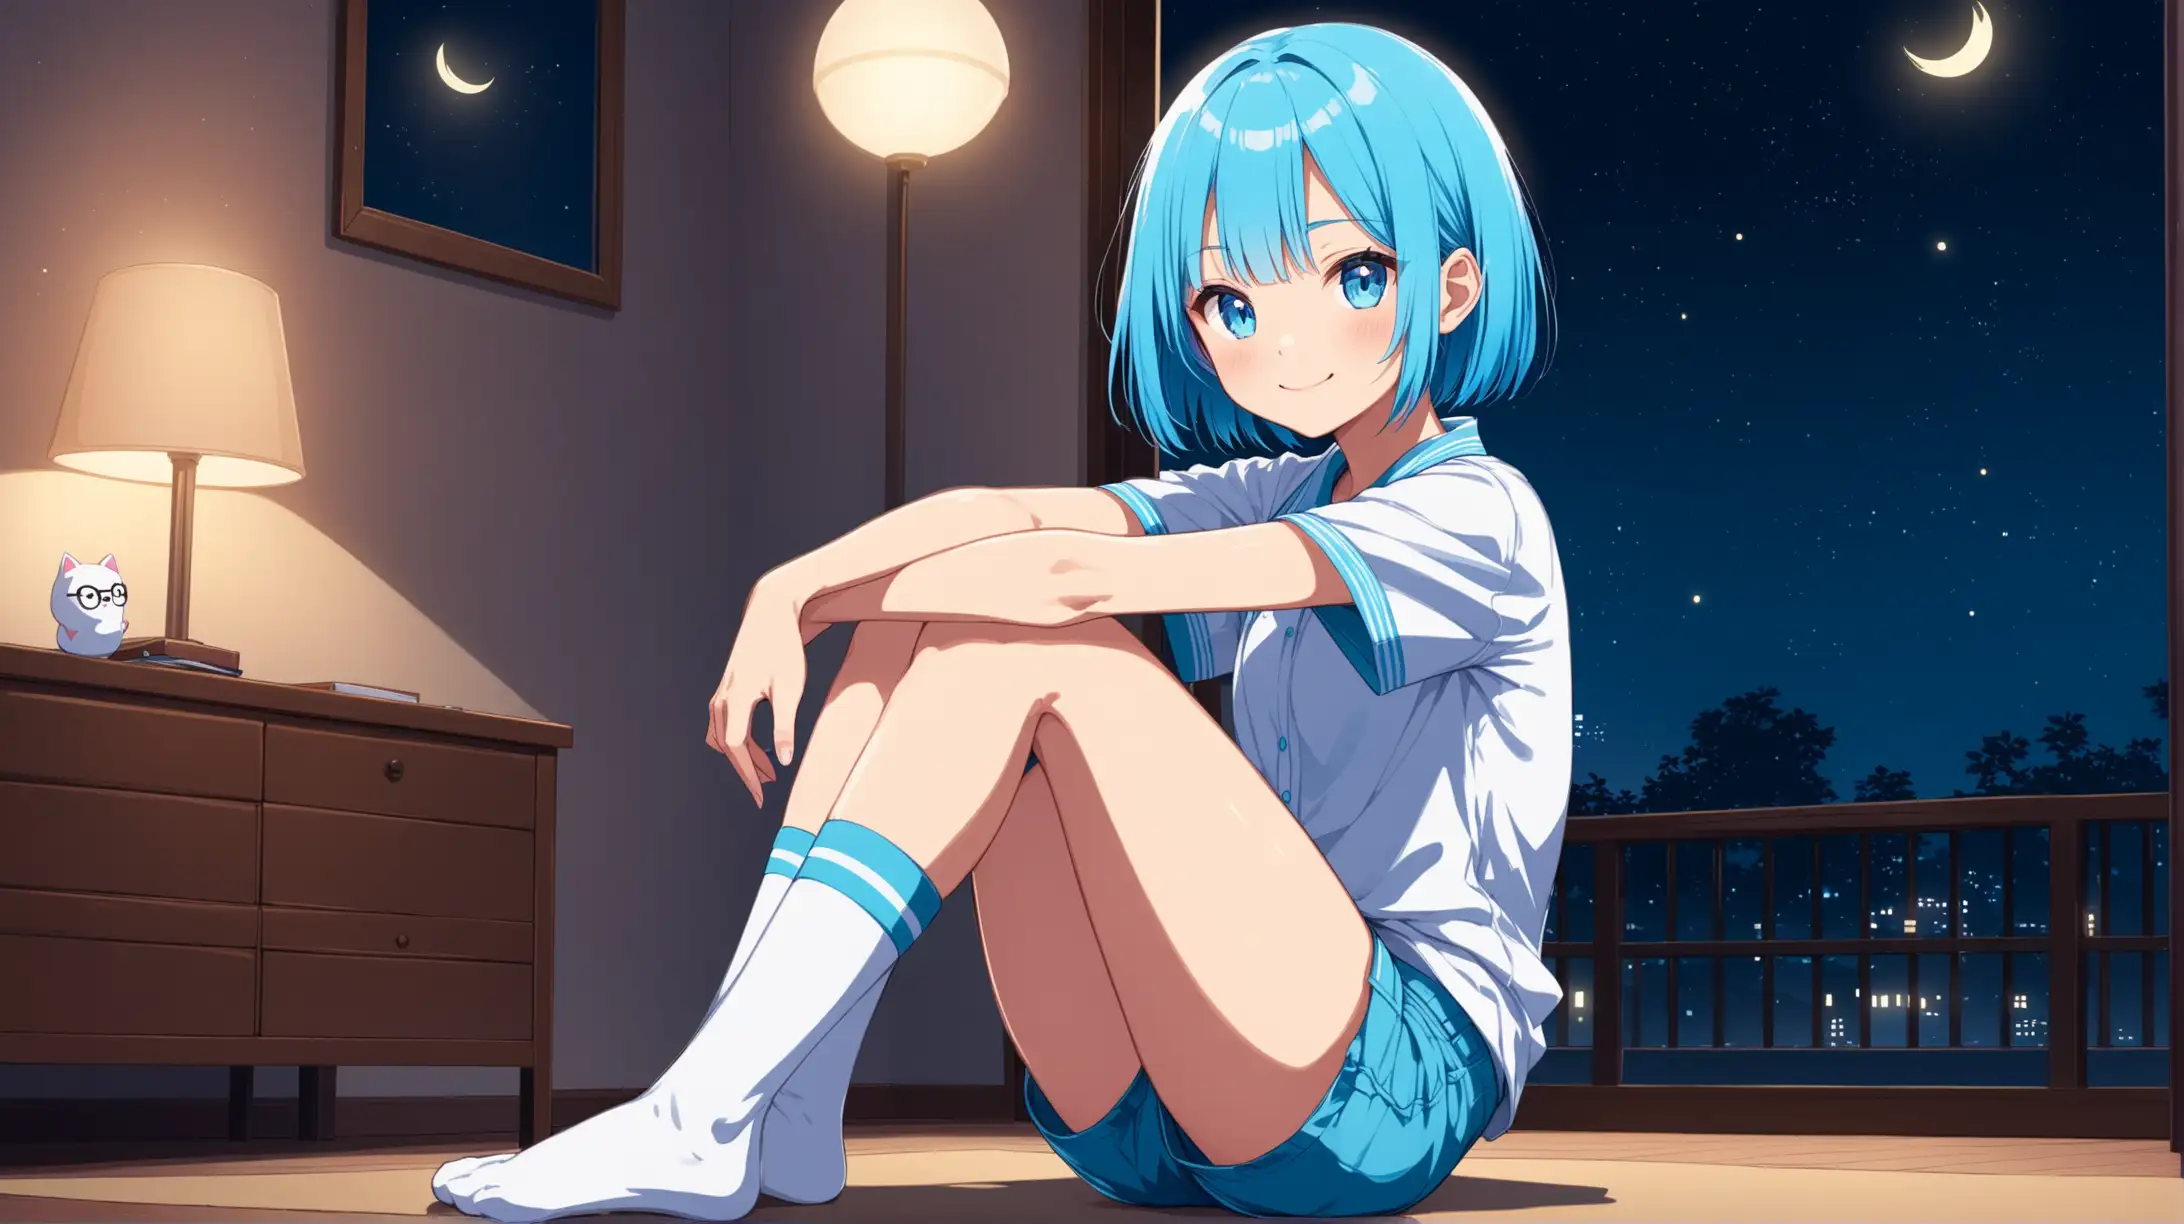 Dynamic Nighttime Portrait Rem Smiling in High Socks and Shorts